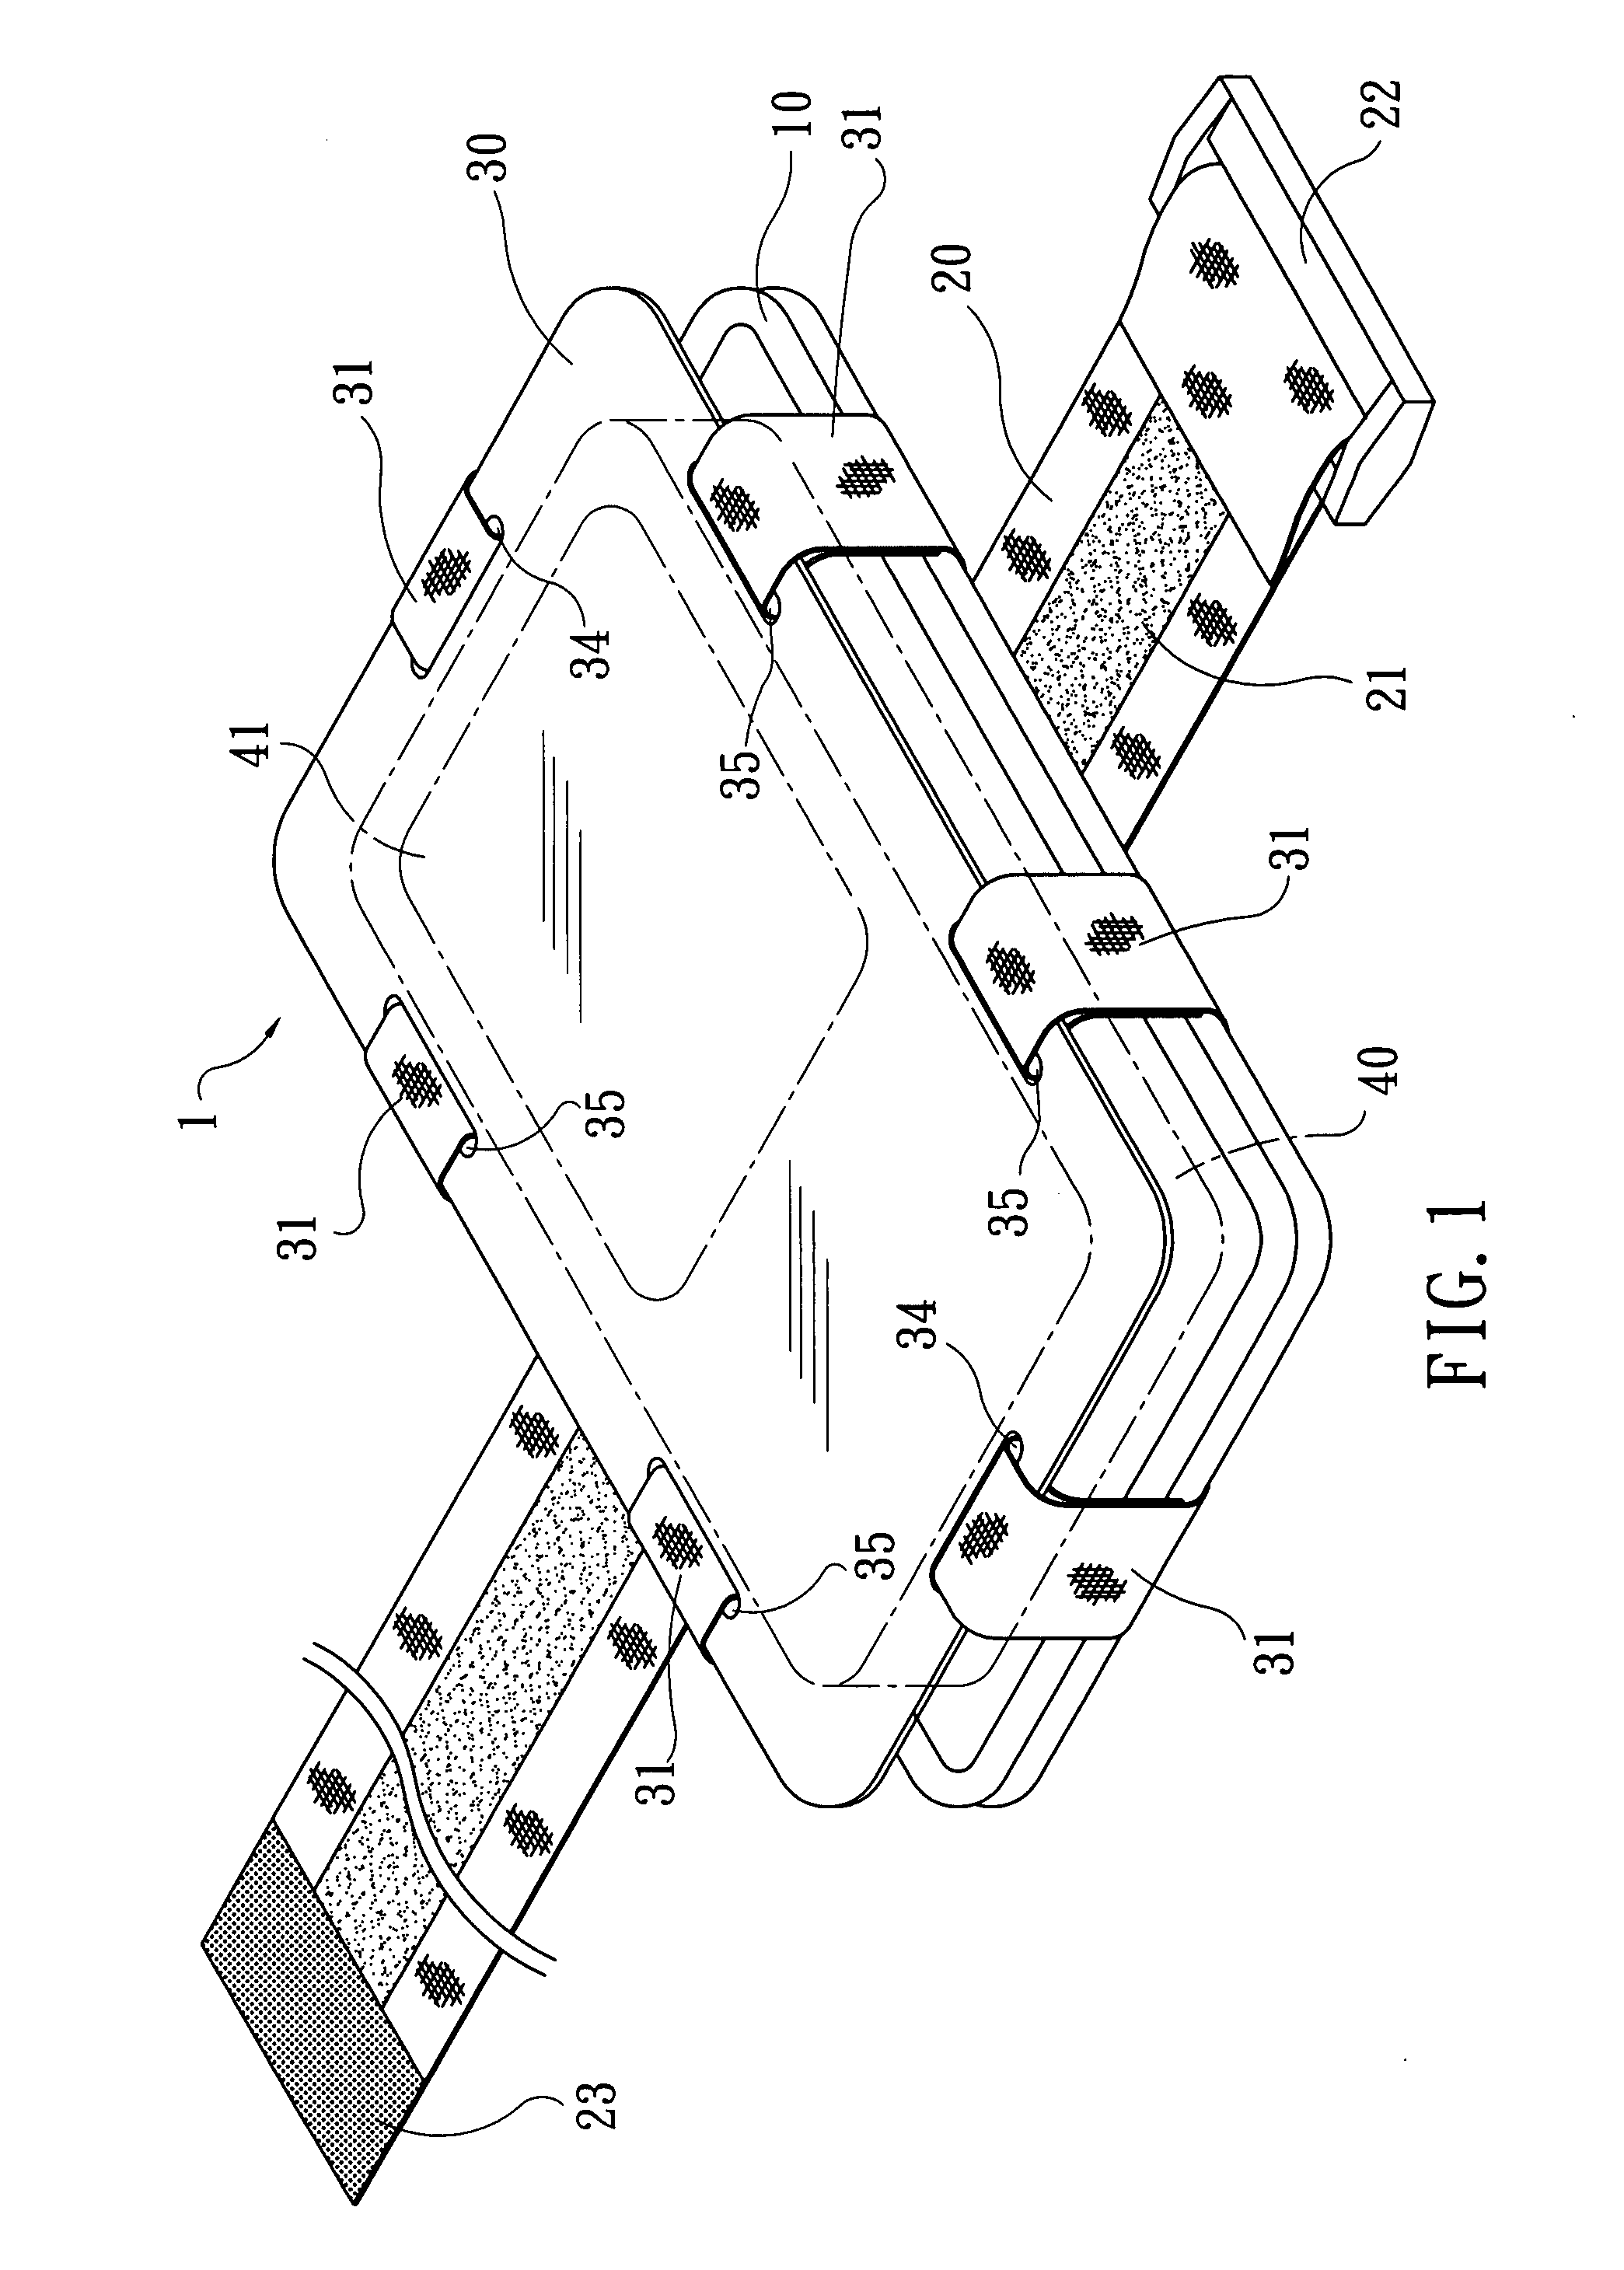 Carrier for handheld device